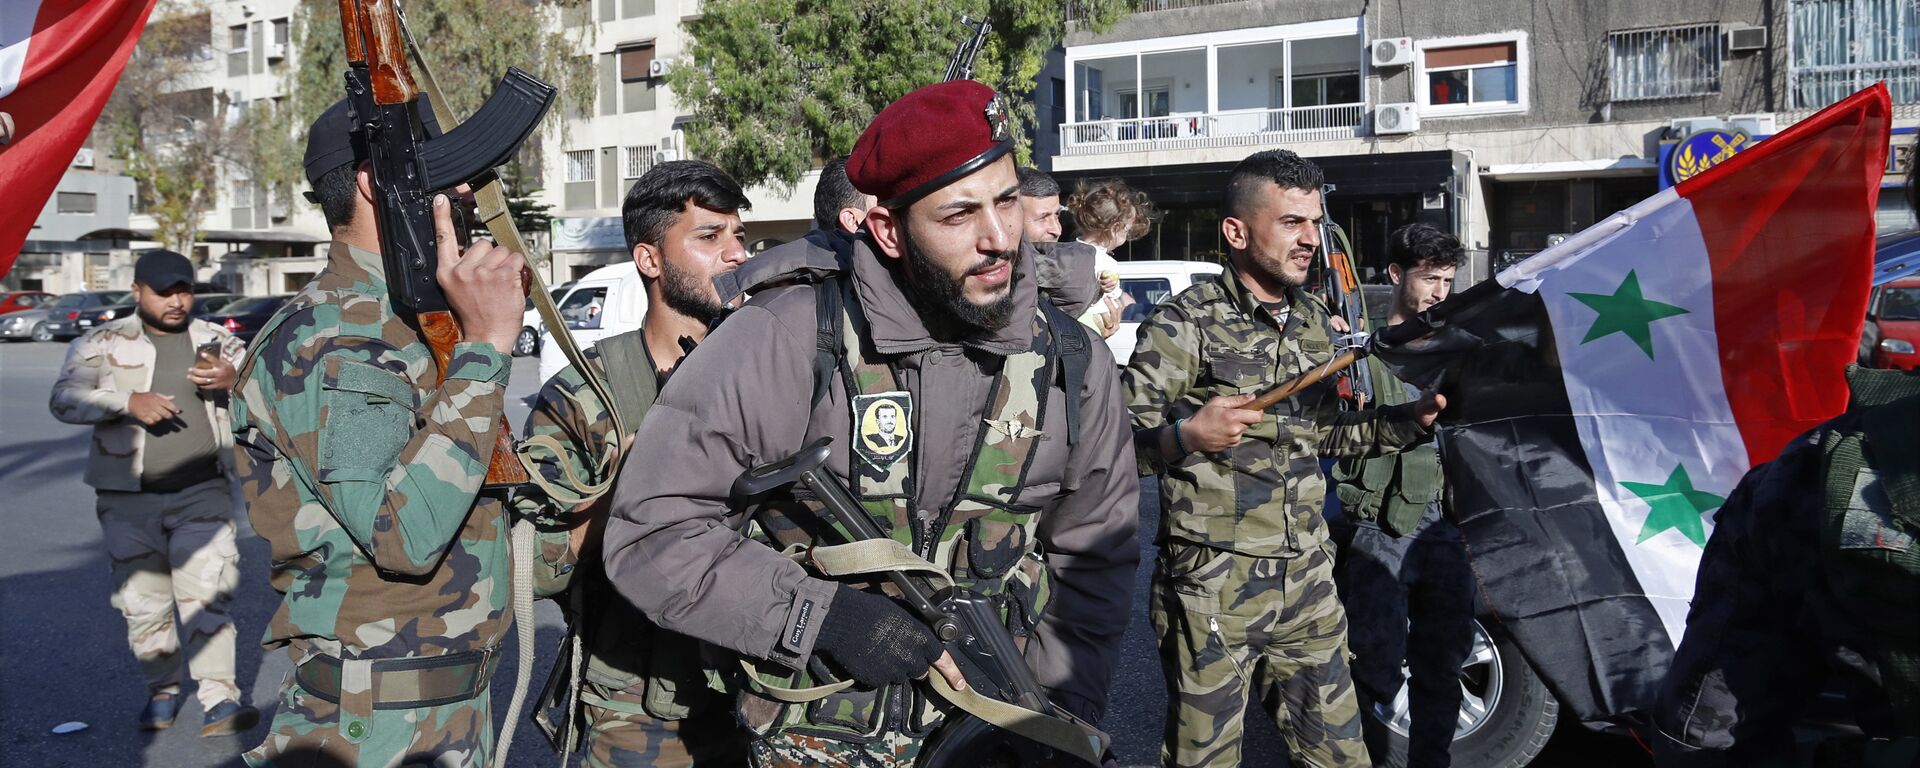 Syrian soldier wave weapons and national flags as they chant slogans against U.S. President Trump during demonstrations following a wave of U.S., British and French military strikes to punish President Bashar Assad for suspected chemical attack against civilians, in Damascus, Syria, Saturday, April 14, 2018 - Sputnik International, 1920, 30.10.2020